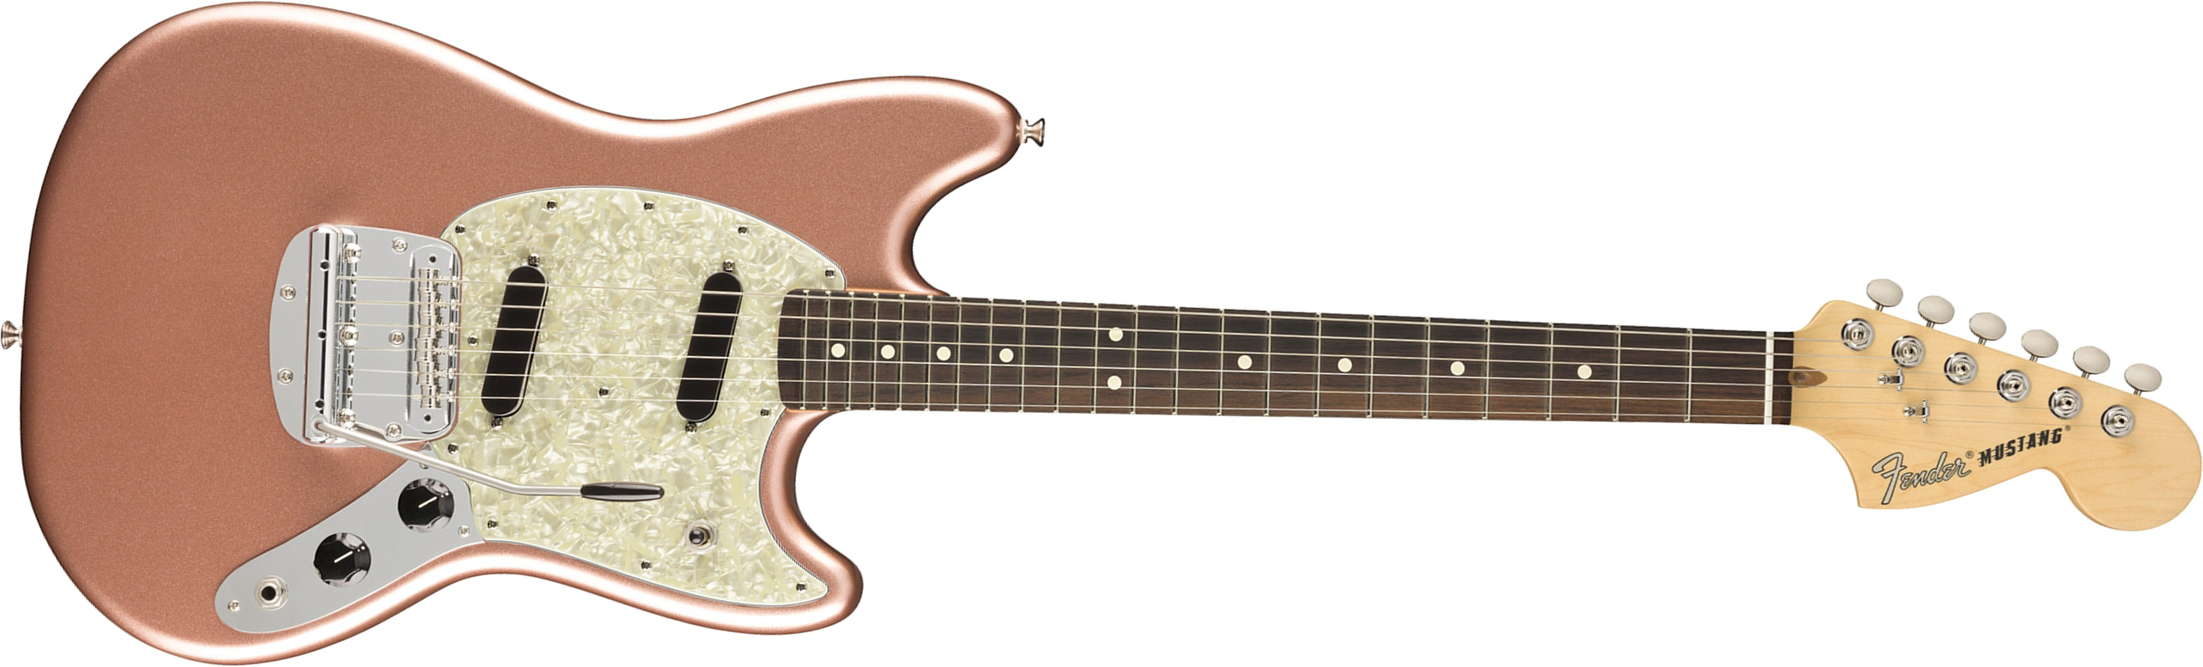 Fender Mustang American Performer Usa Ss Rw - Penny - Guitare Électrique Double Cut - Main picture